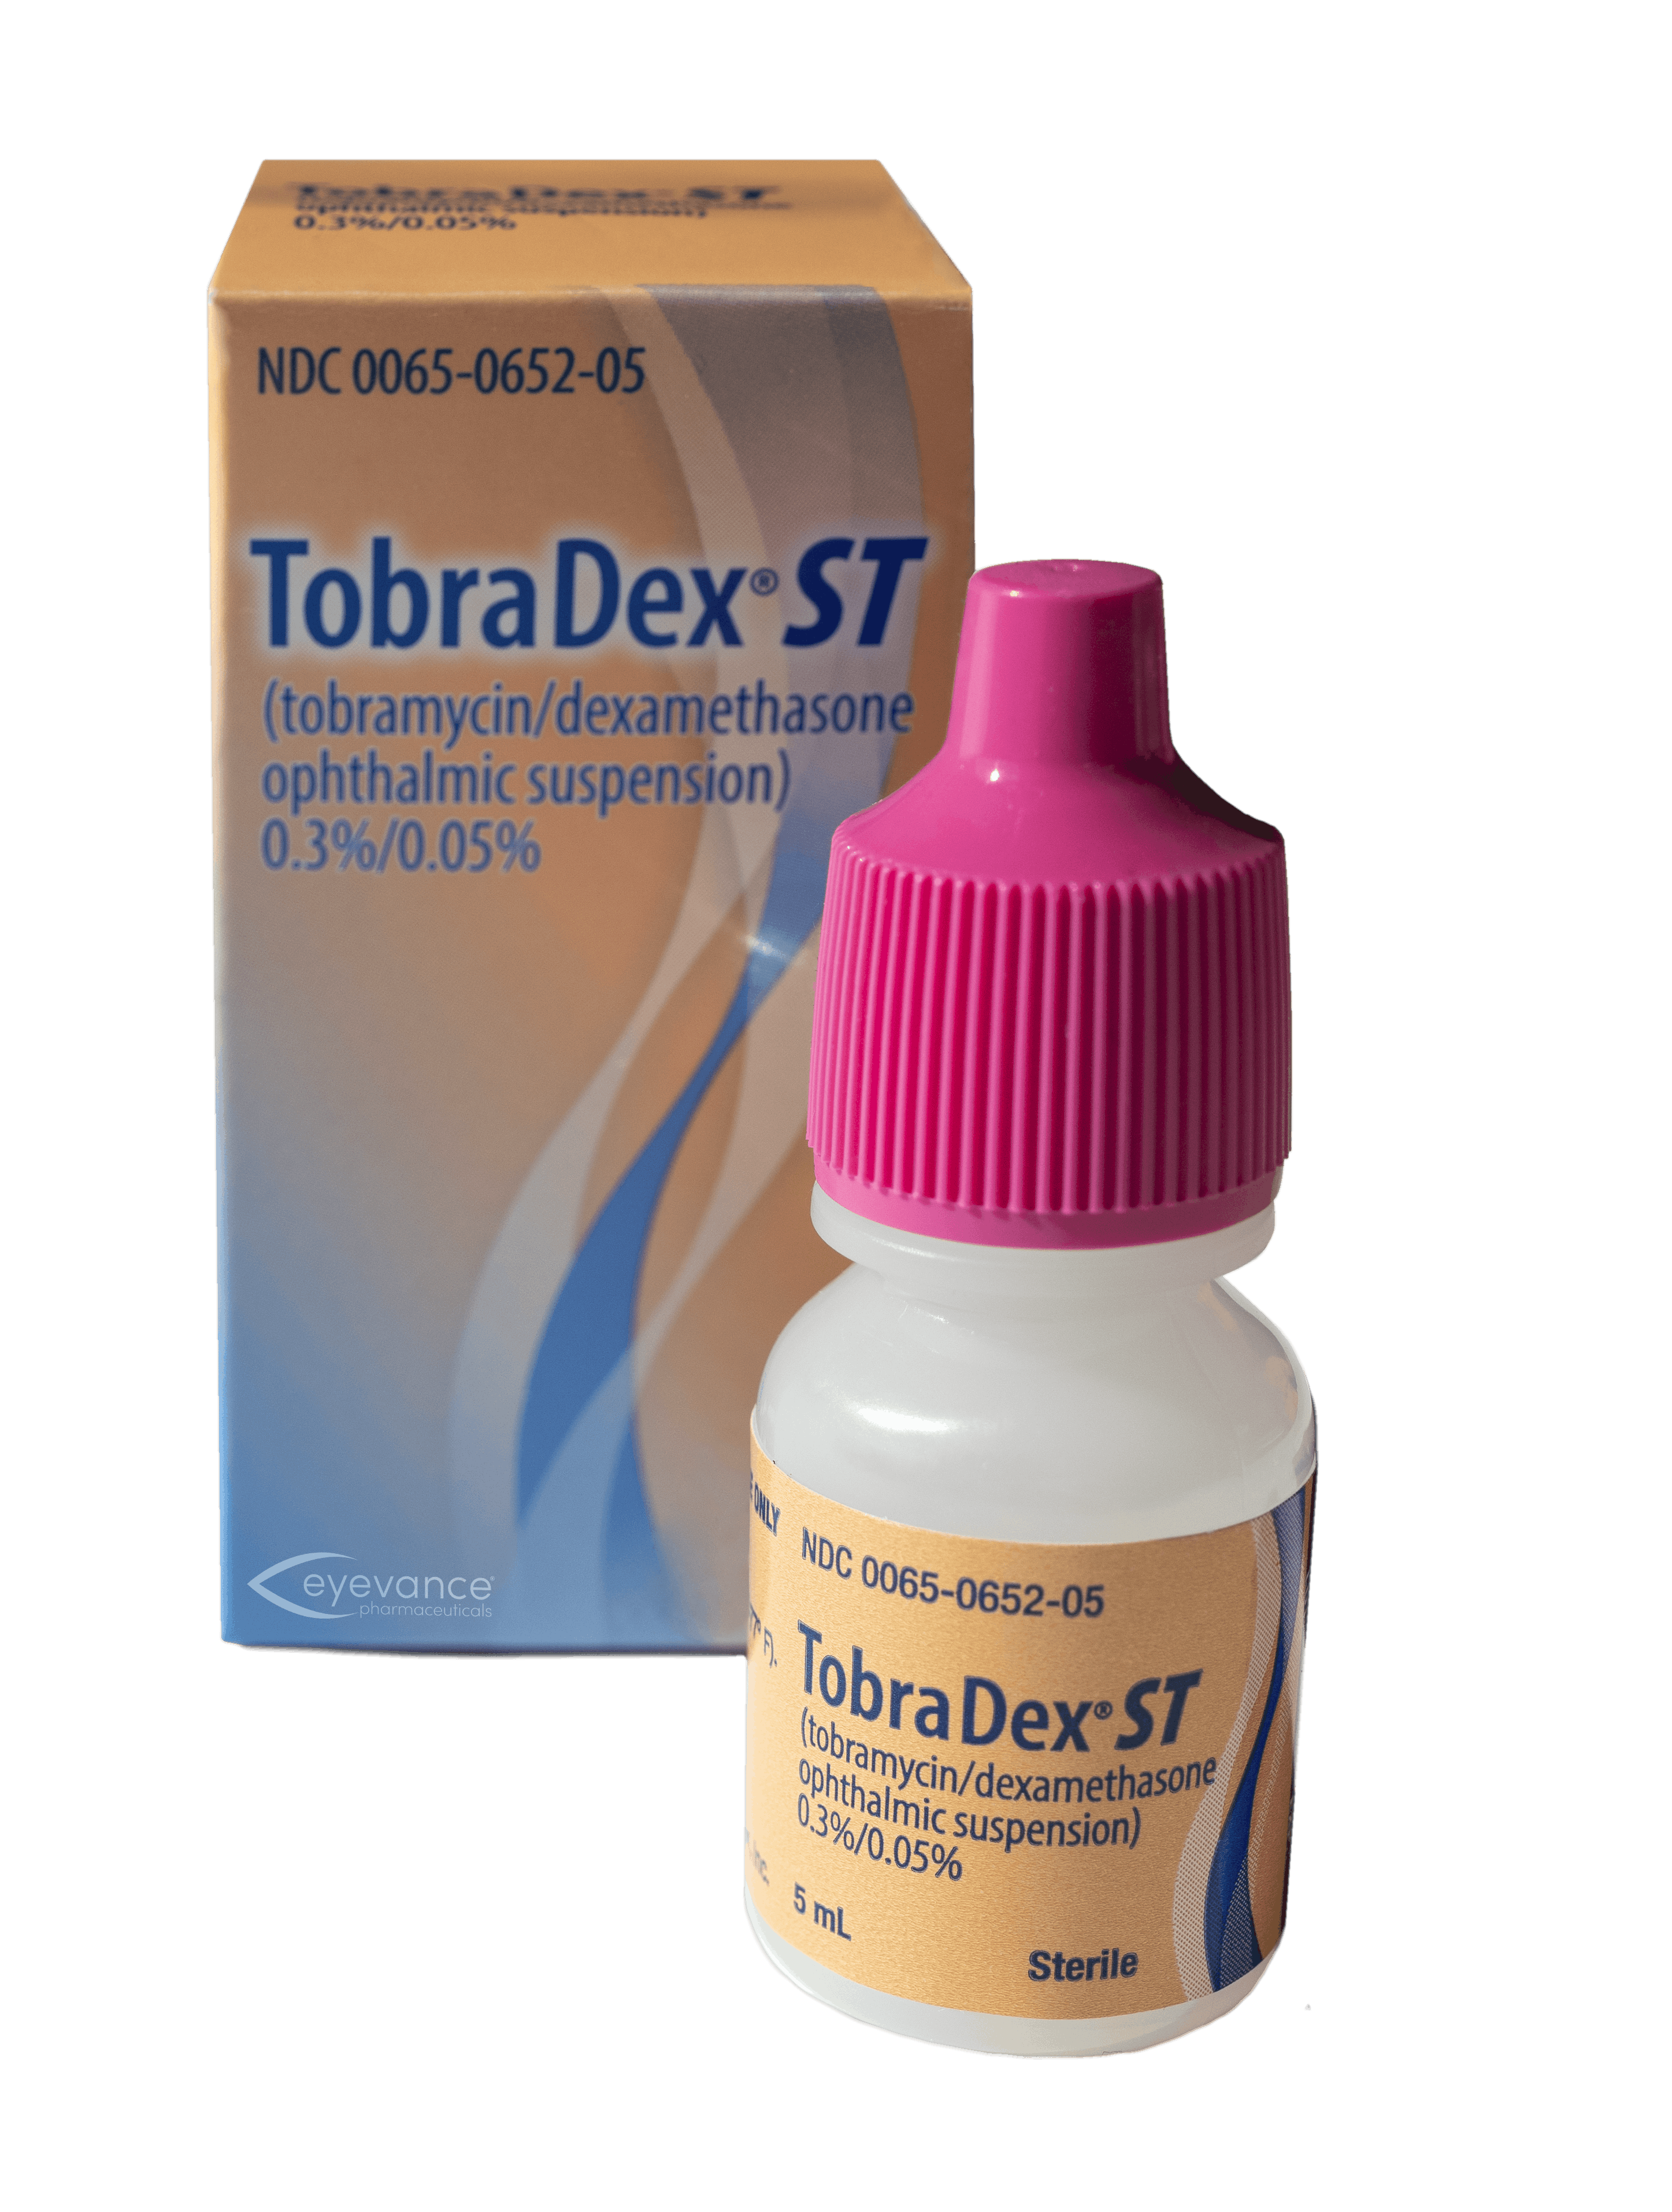 Eyevance Pharmaceuticals launches Tobradex ST in the United States